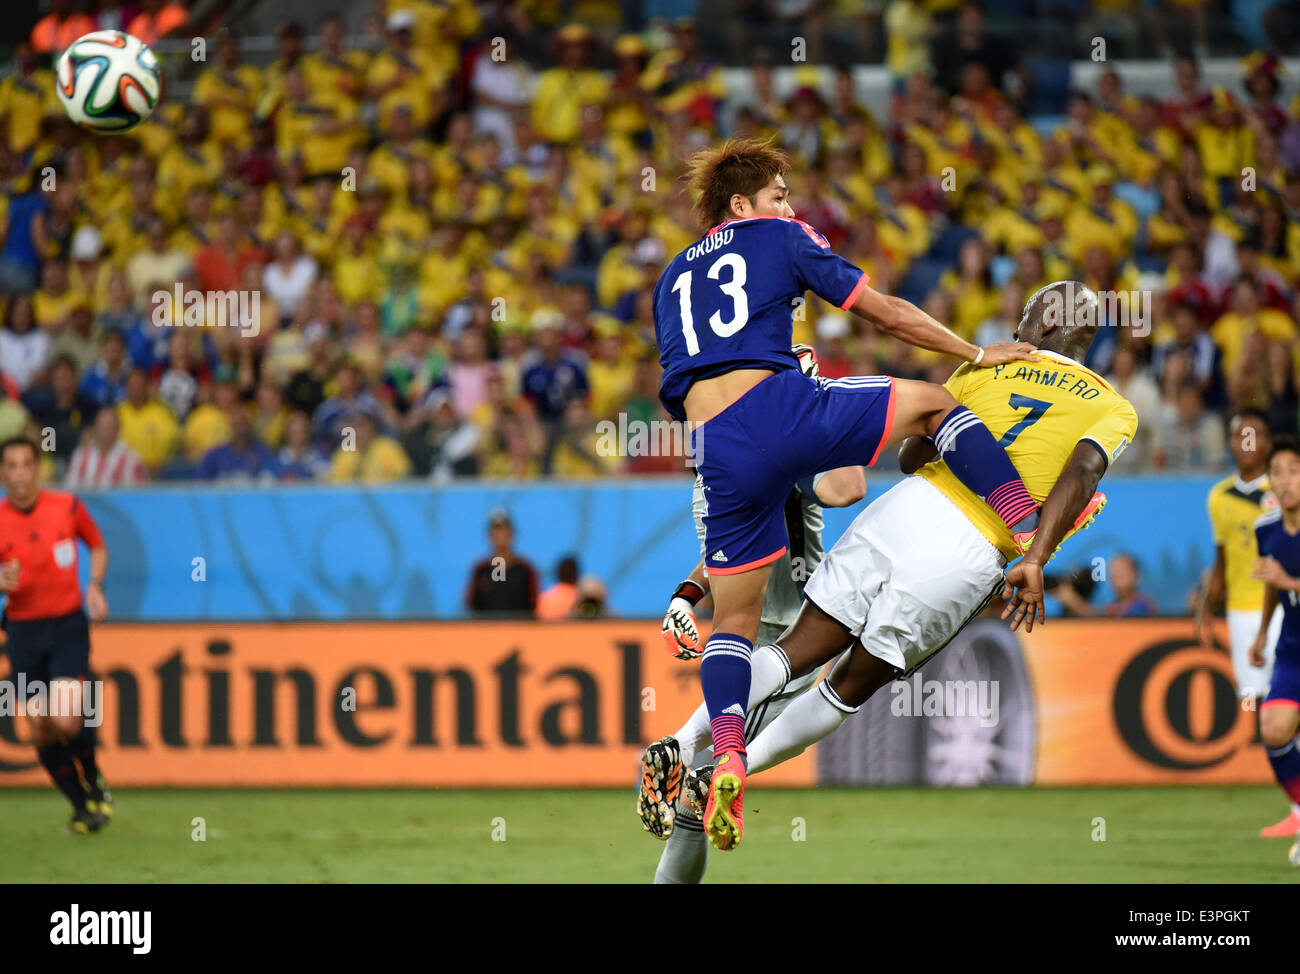 (140624) -- CUIABA, June 24, 2014 (Xinhua) -- Japan's Yoshito Okubo vies with Colombia's Pablo Armero during a Group C match between Japan and Colombia of 2014 FIFA World Cup at the Arena Pantanal Stadium in Cuiaba, Brazil, June 24, 2014. (Xinhua/Liu Dawei) Stock Photo